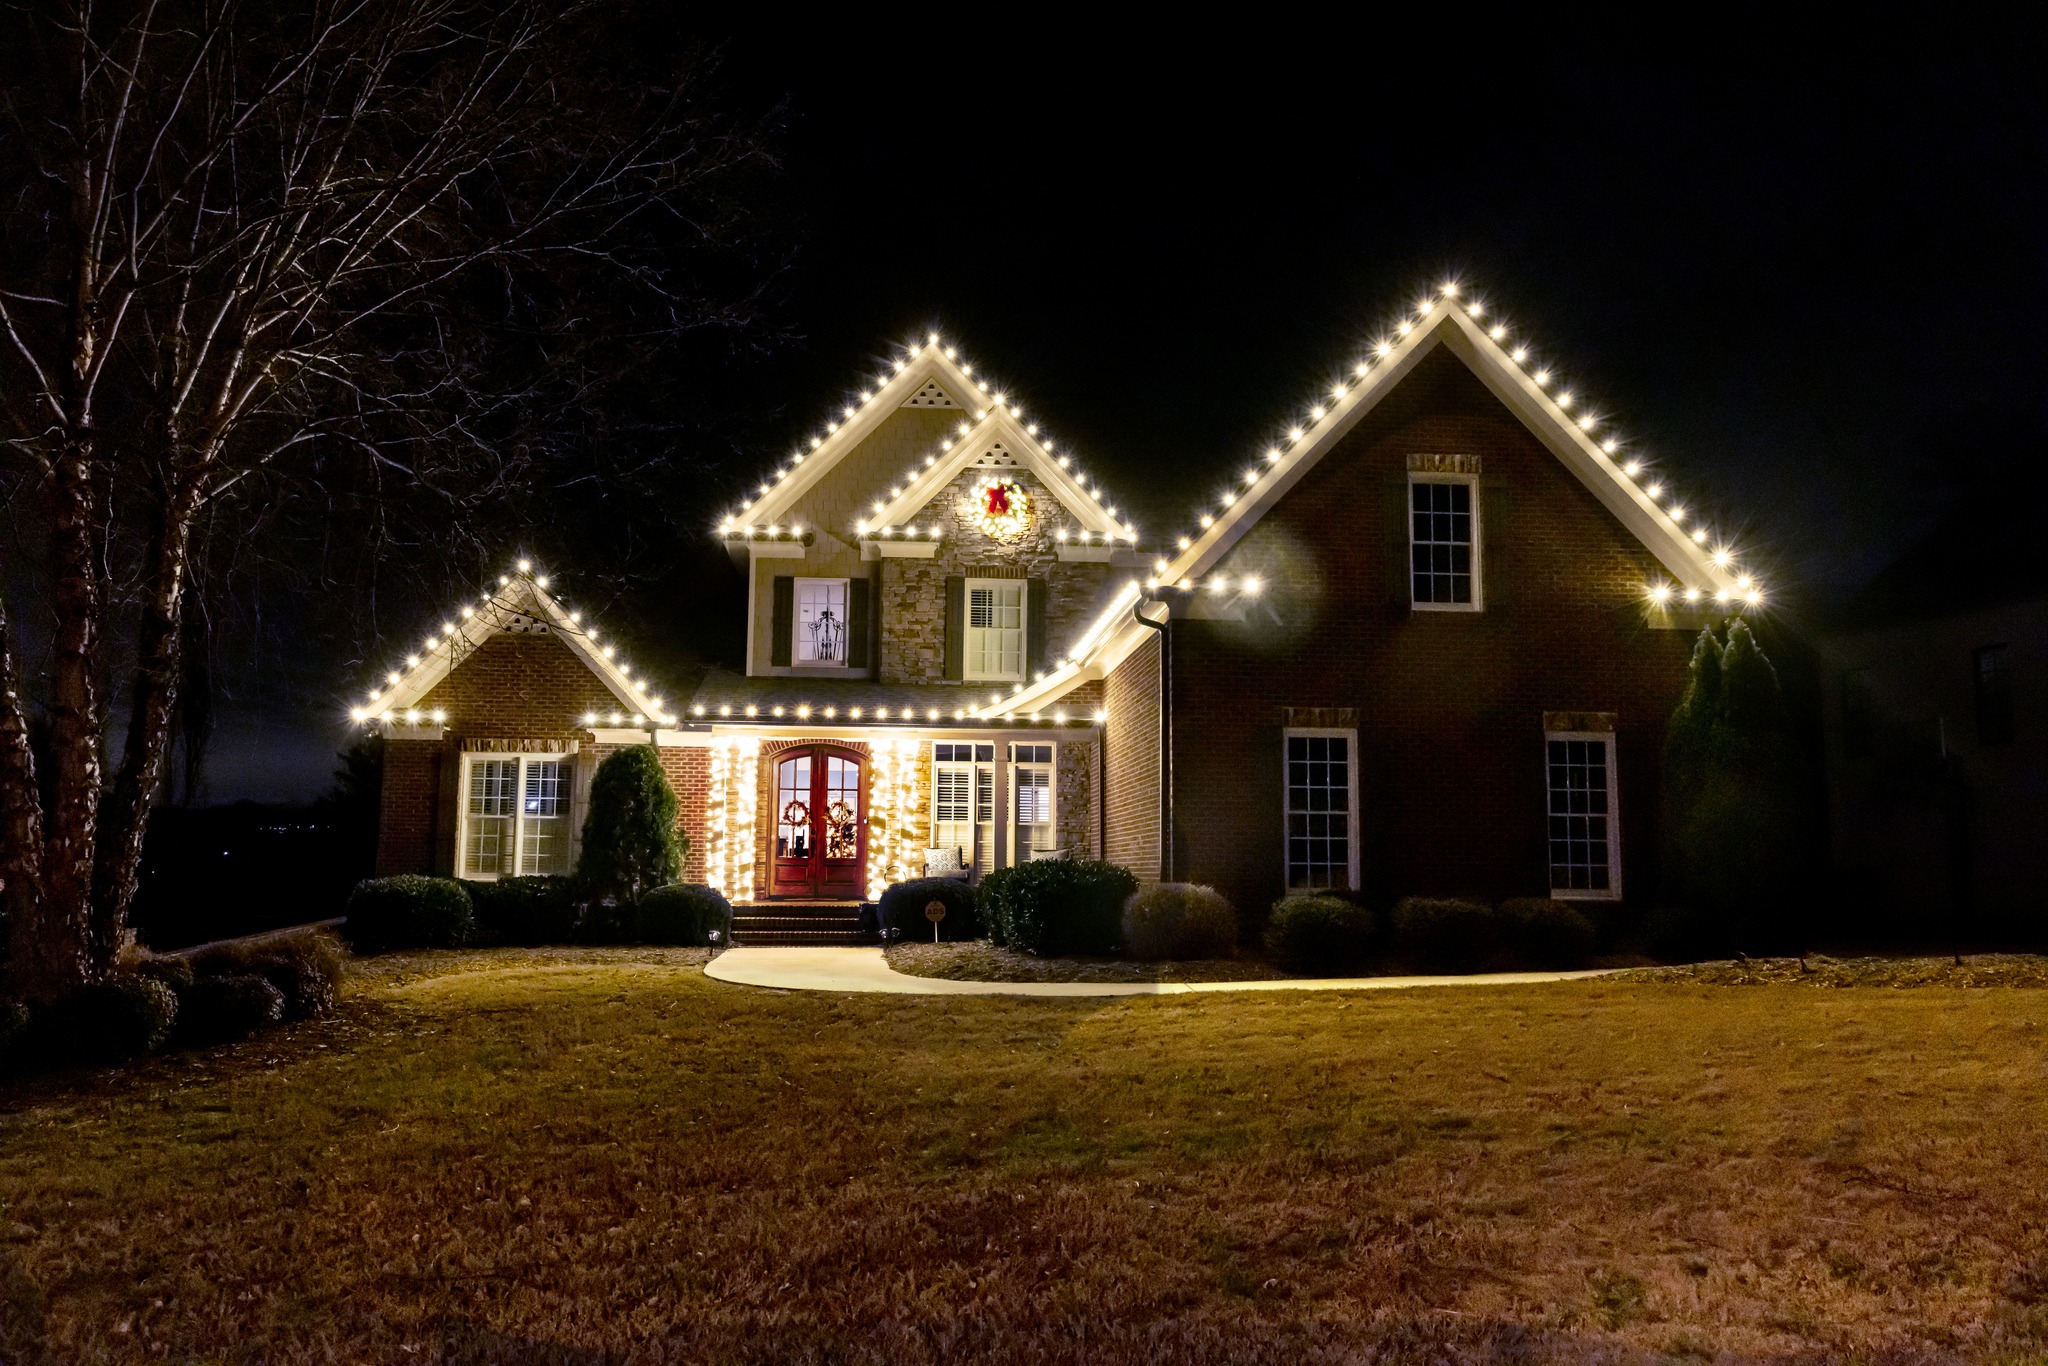 holiday lights on a house